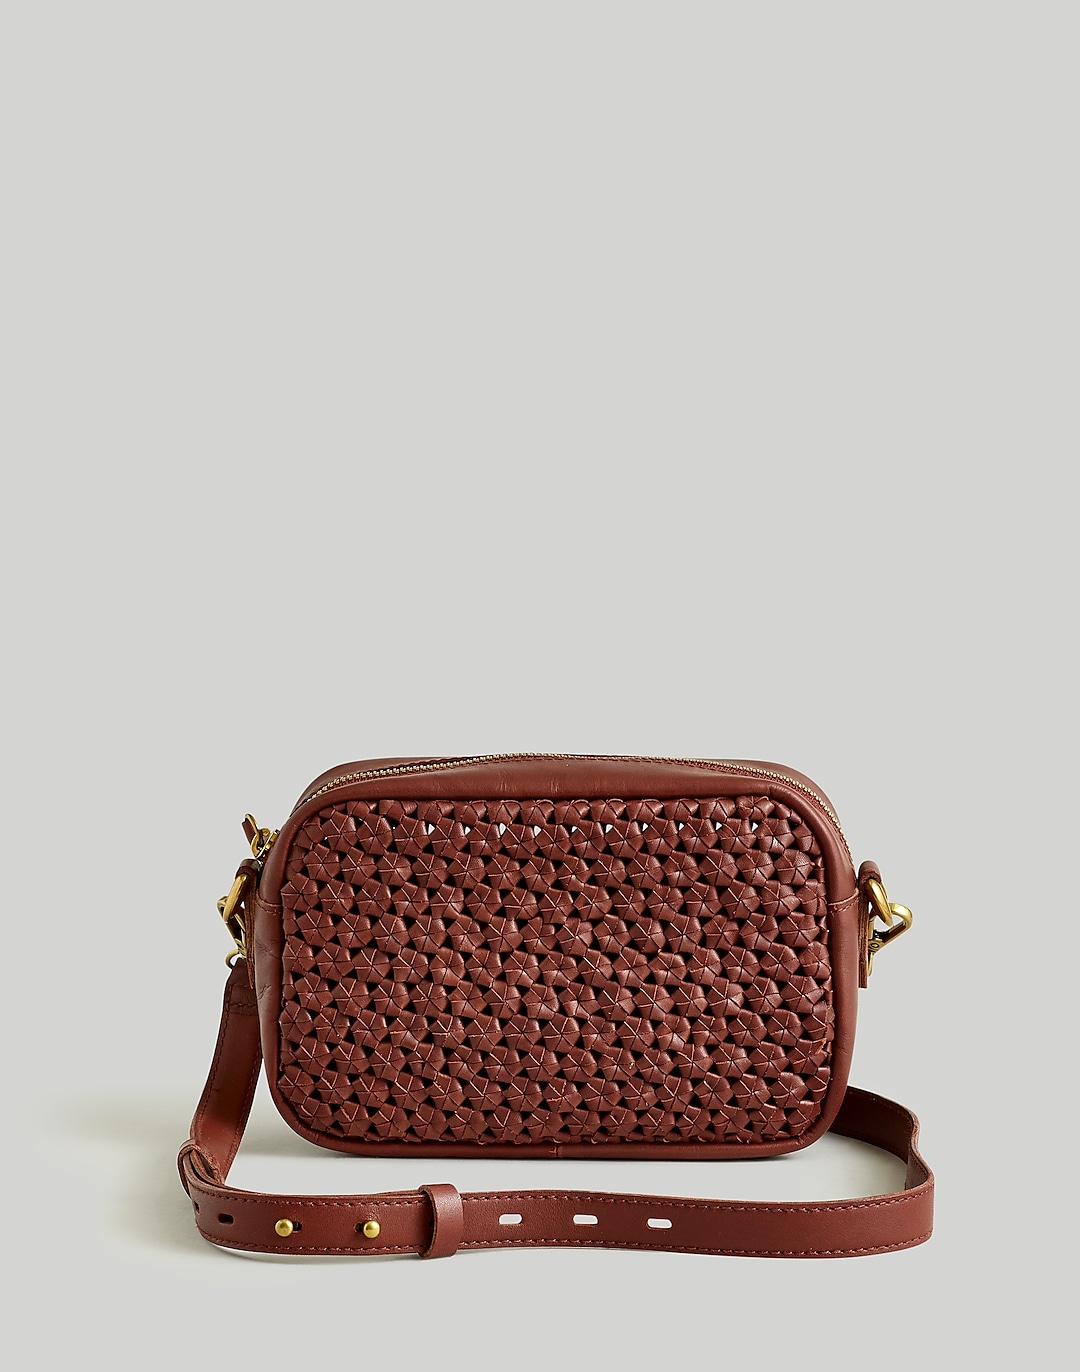 The Transport Camera Bag: Crochet Leather Edition | Madewell